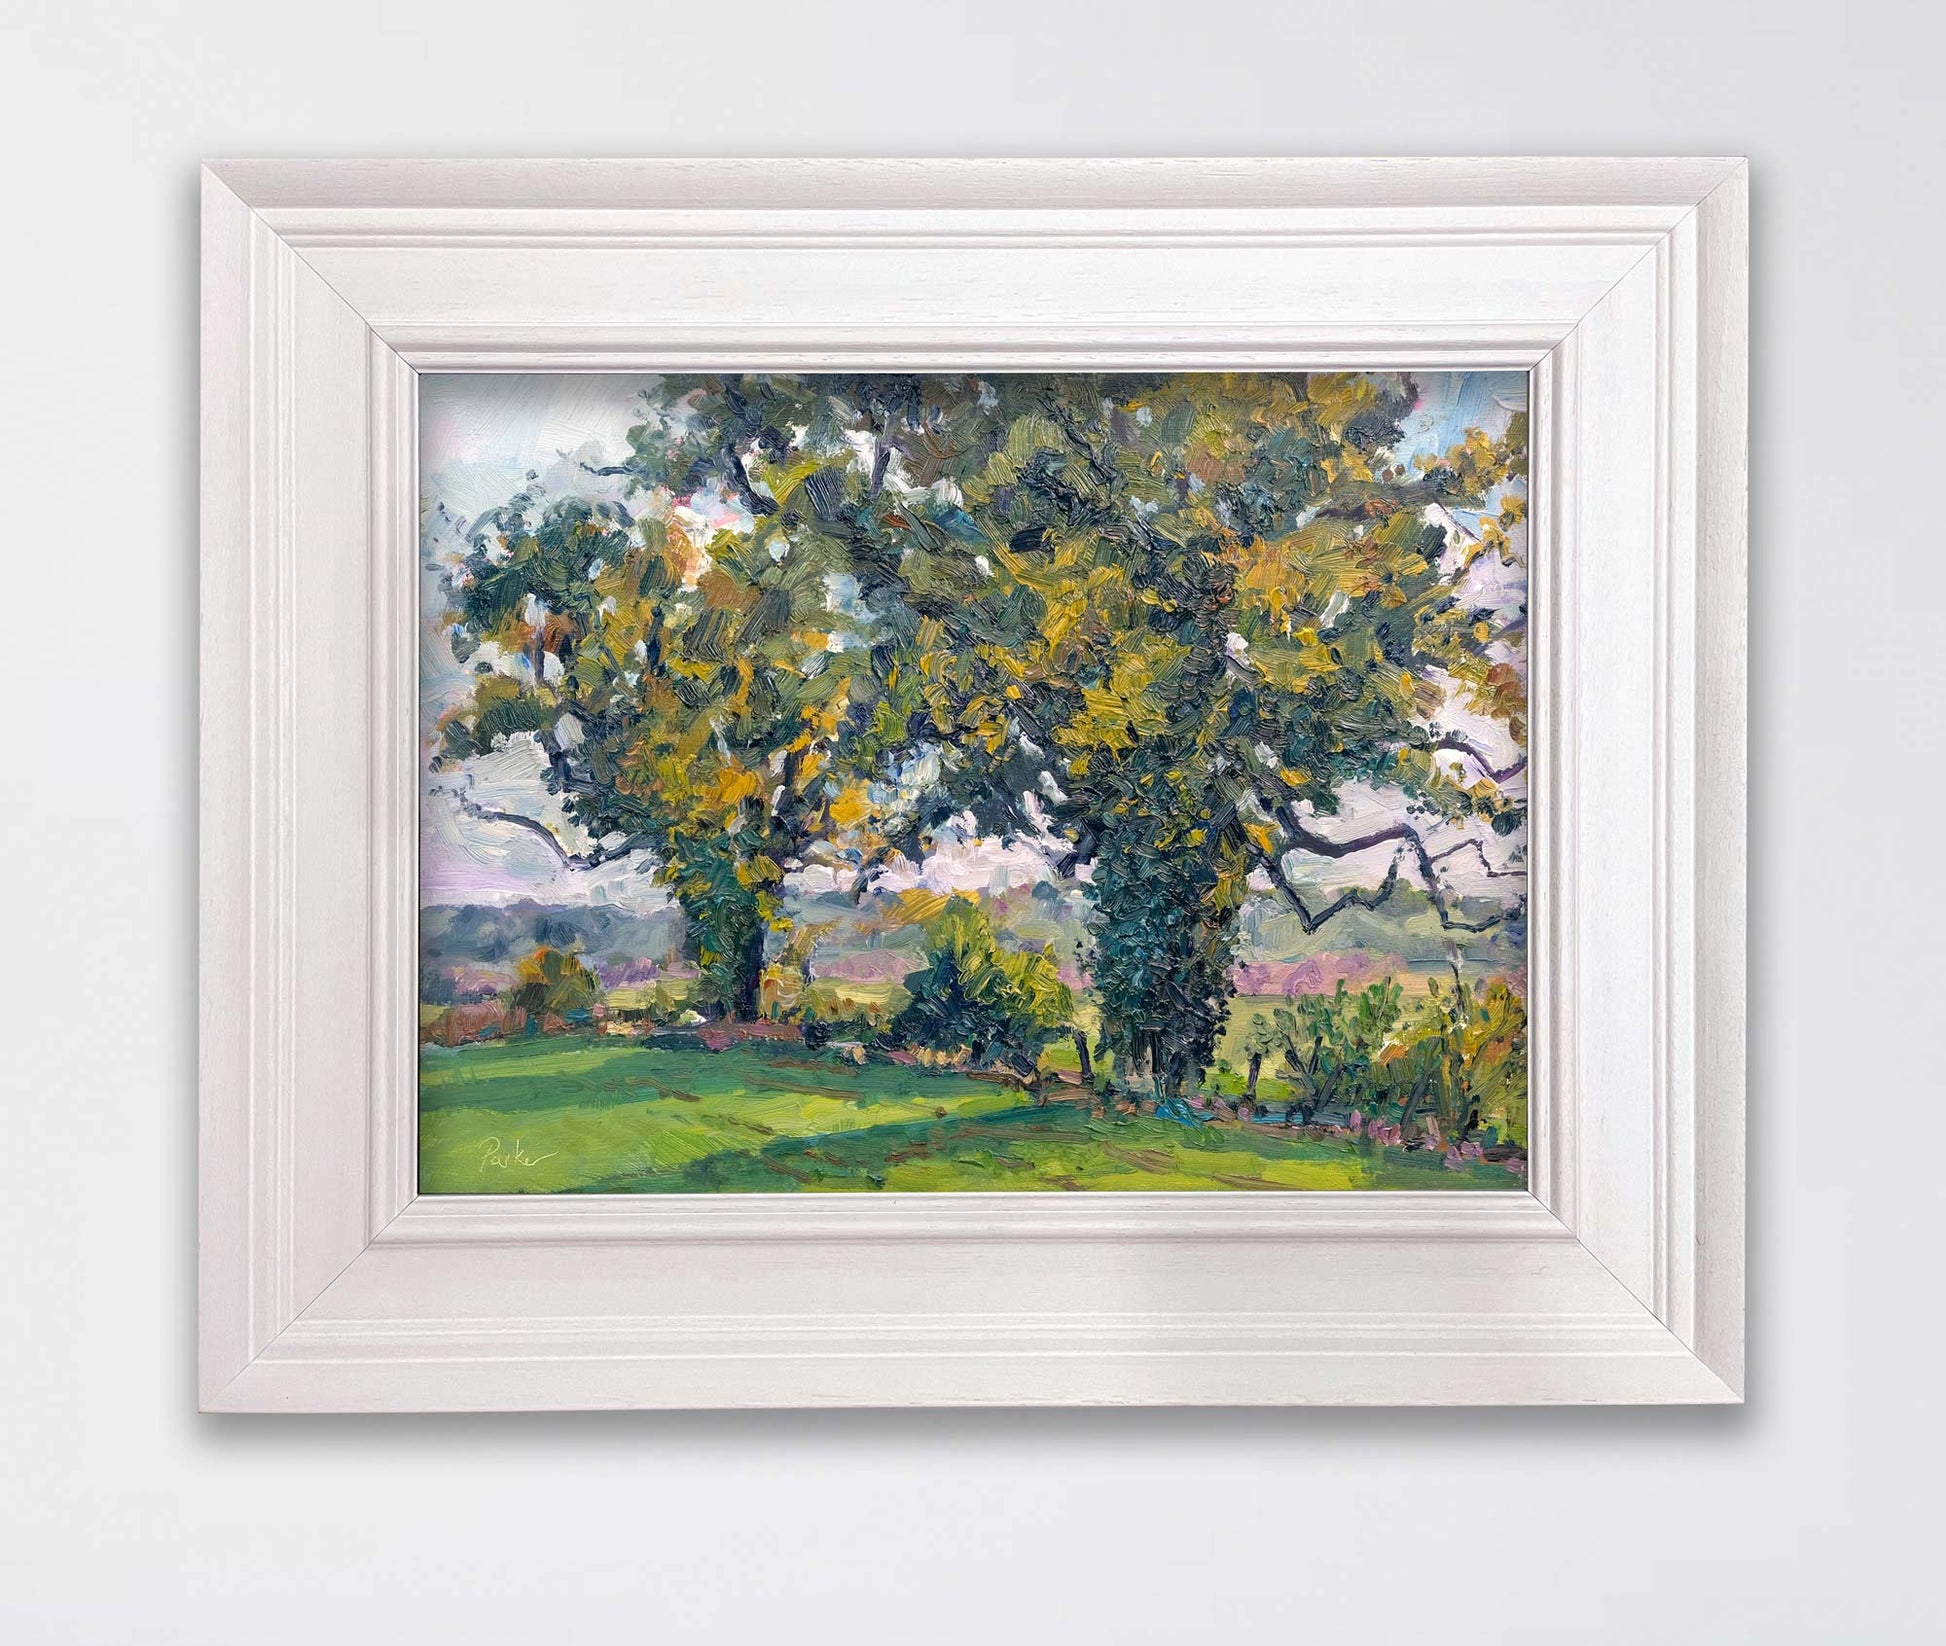 Autumn Oak trees, Coxwold, oil painting in framed view by landscape artist Jeff Parker